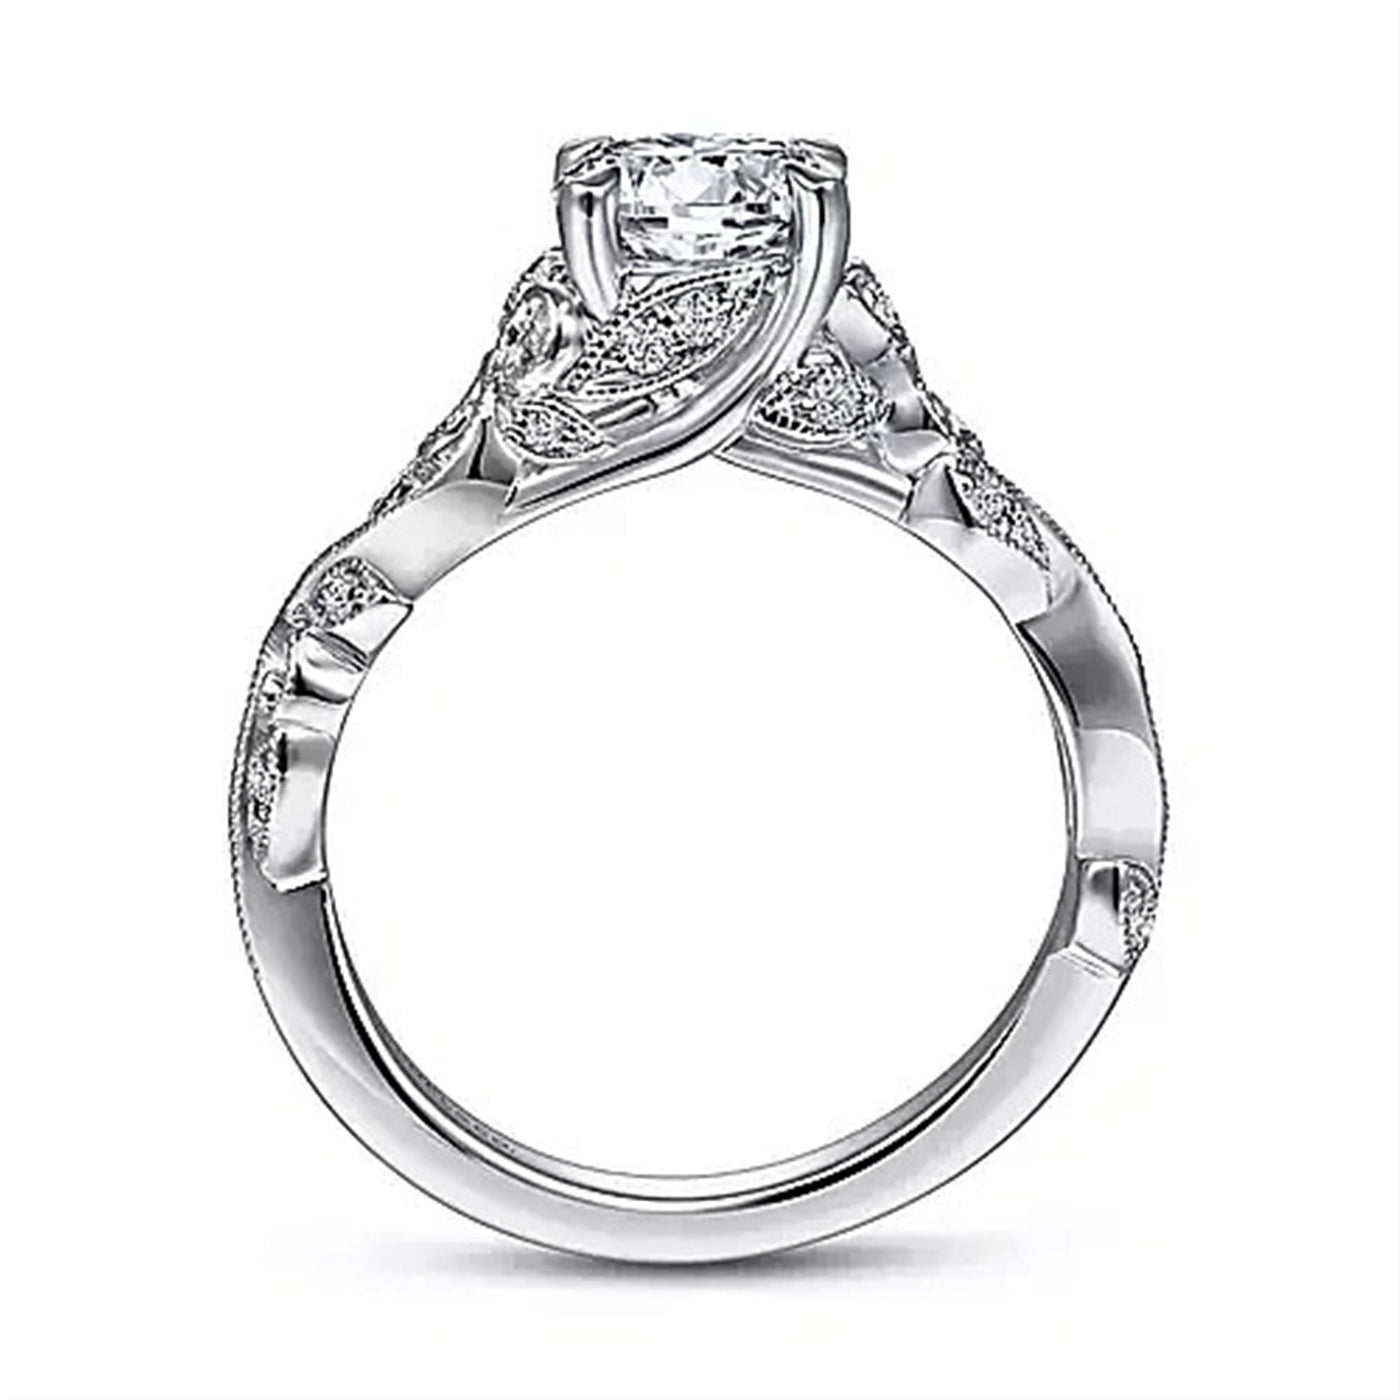 Gabriel - Floral Collection 14K White Gold 0.15ctw 4 Prong Style Diamond Semi-Mount Engagement Ring